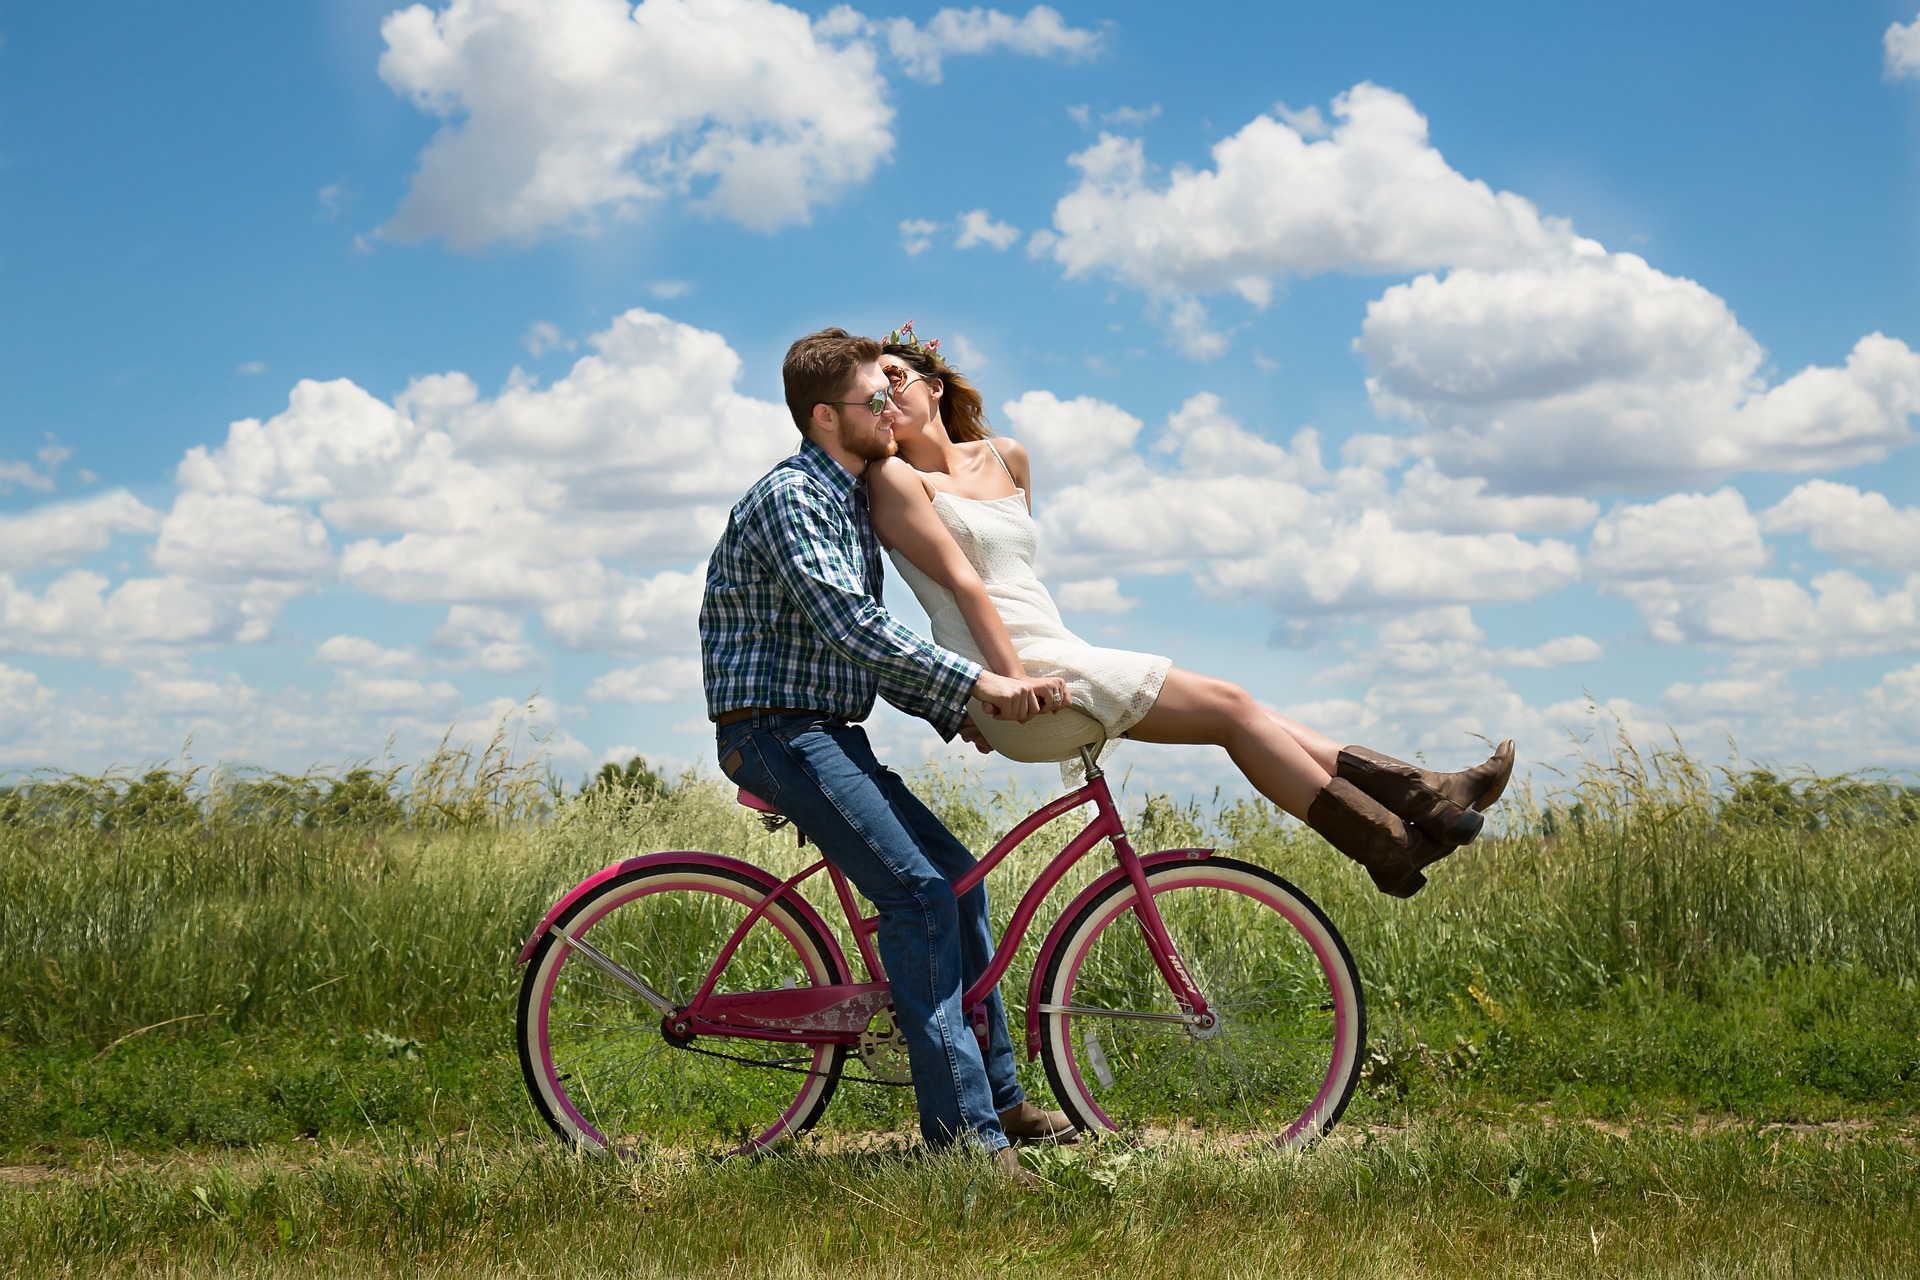 Man and Women Kissing on a Bicycle